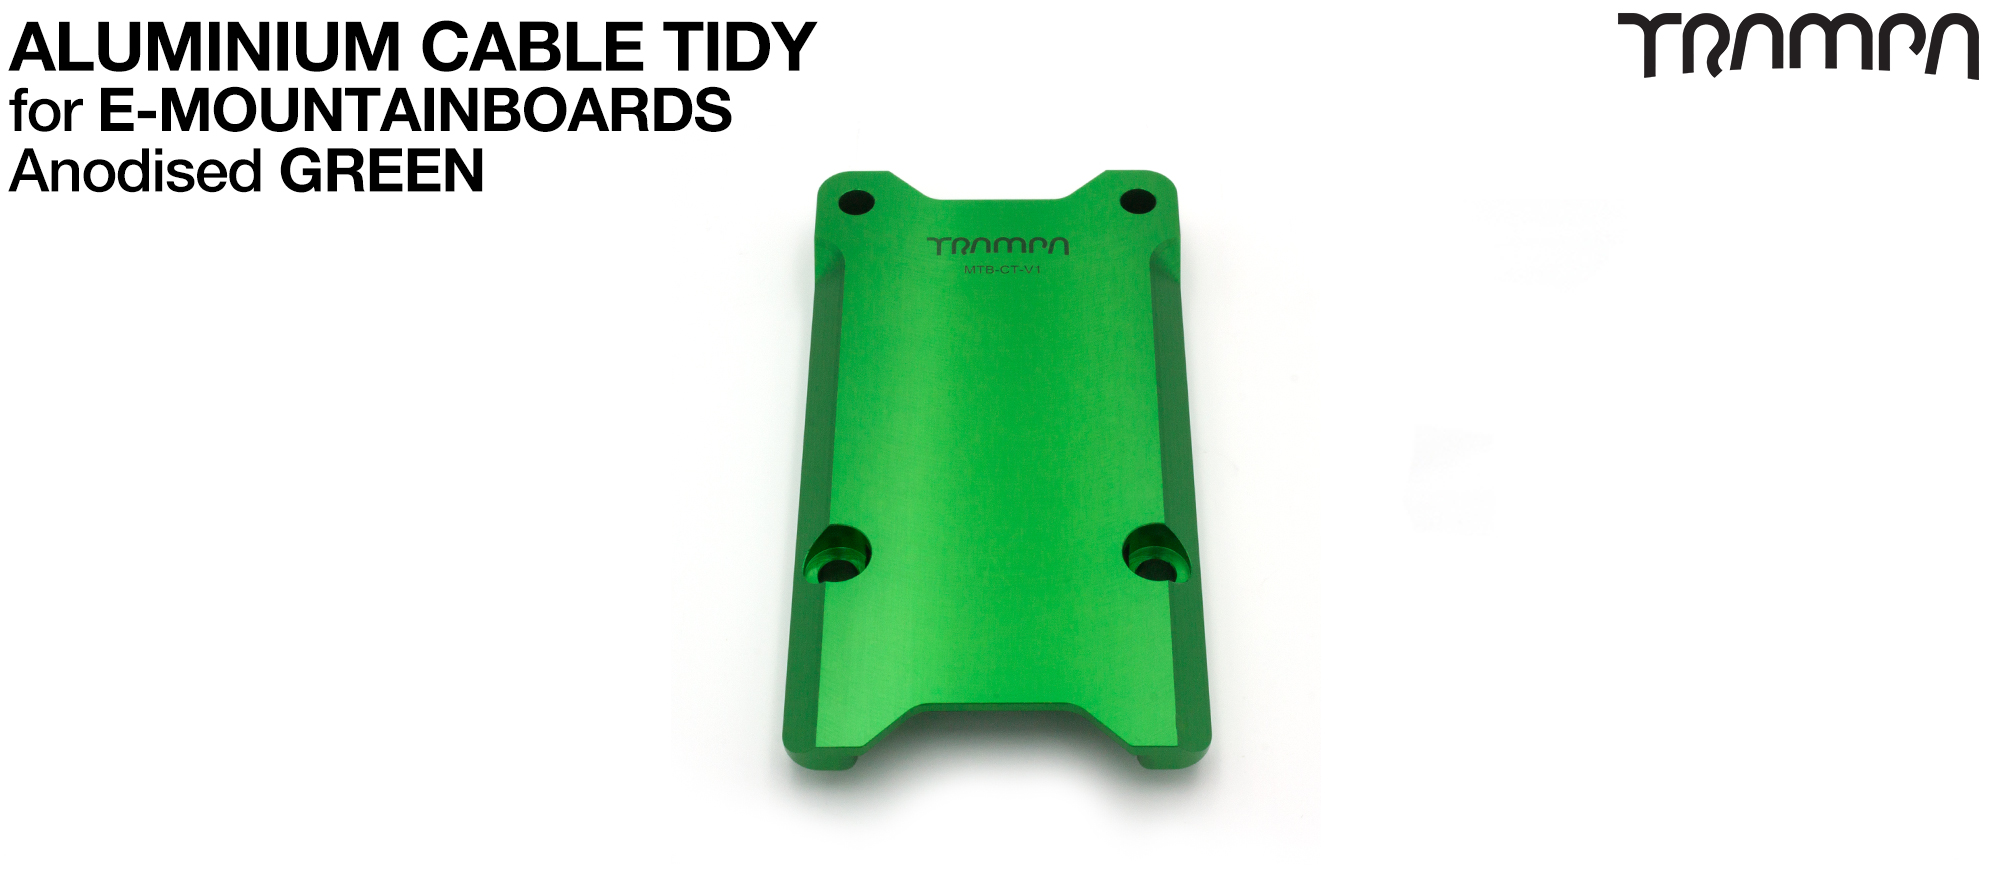 REAR CABLE Router Anodised - GREEN 